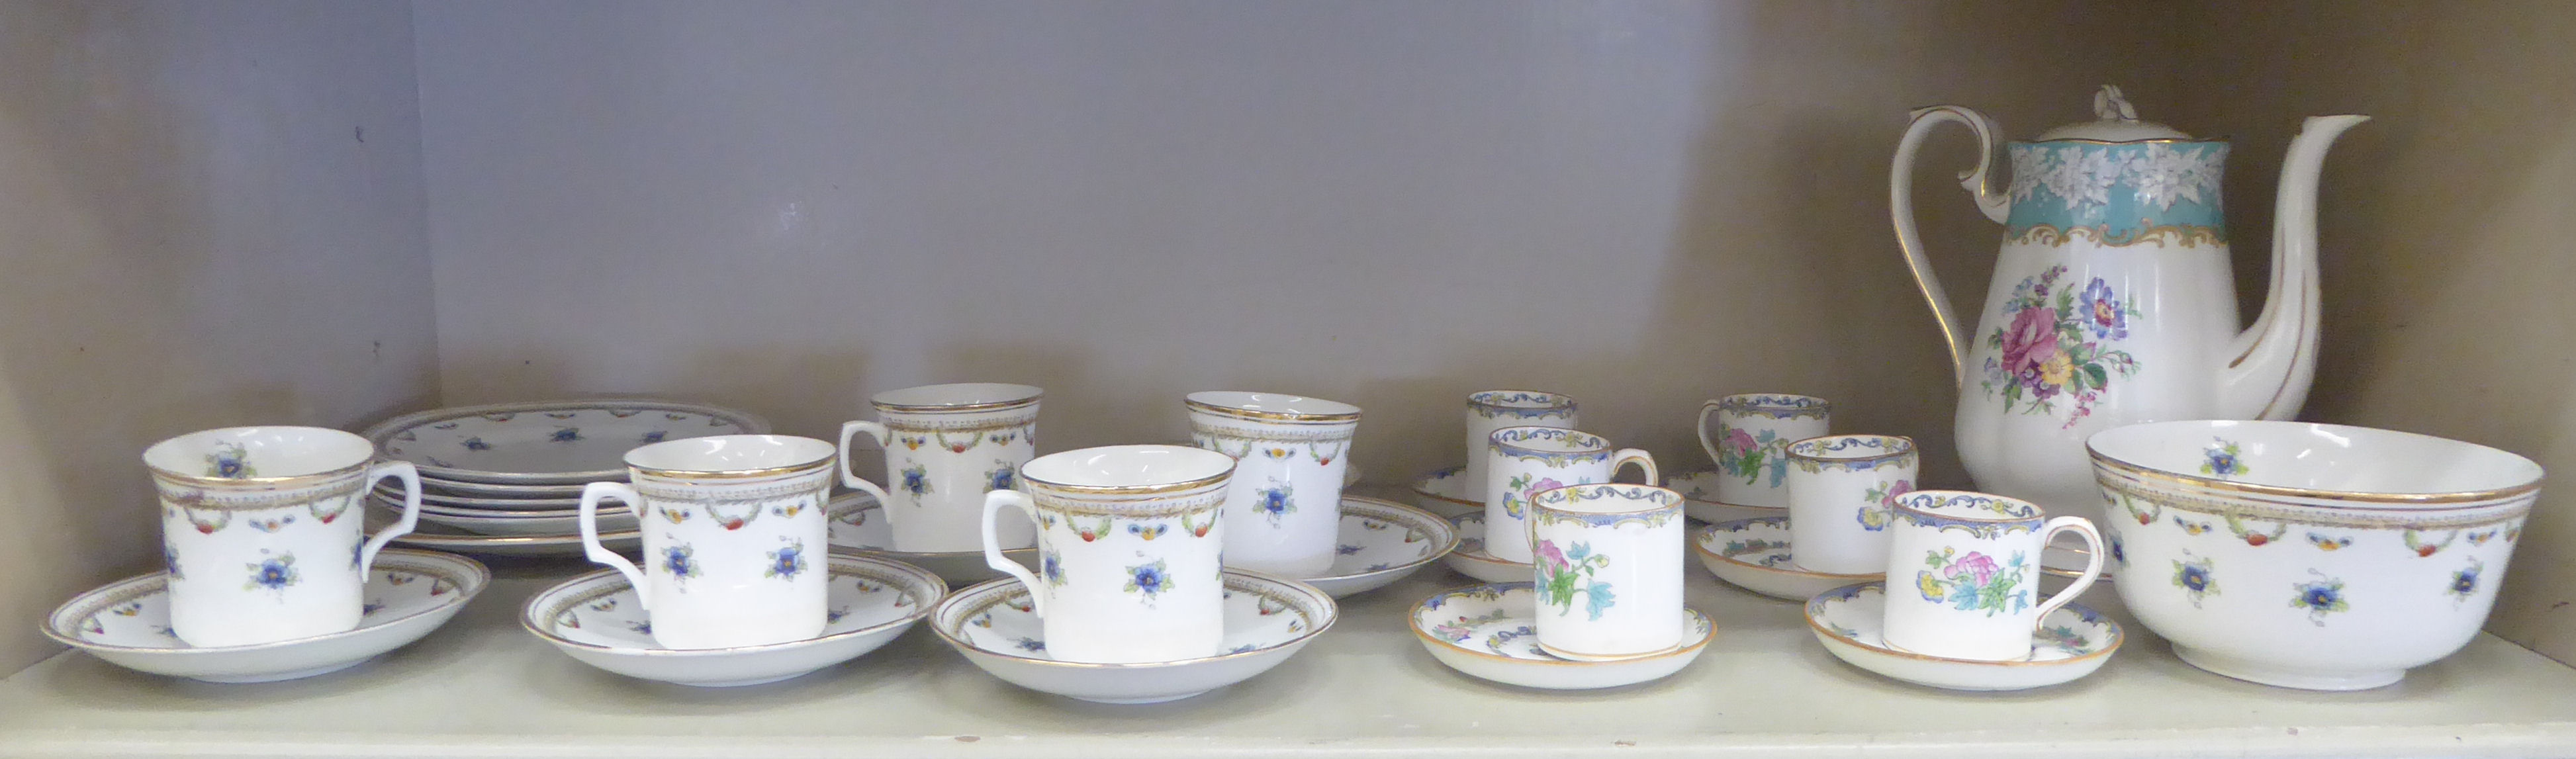 Mintons china coffee cans and saucers, decorated with flora,